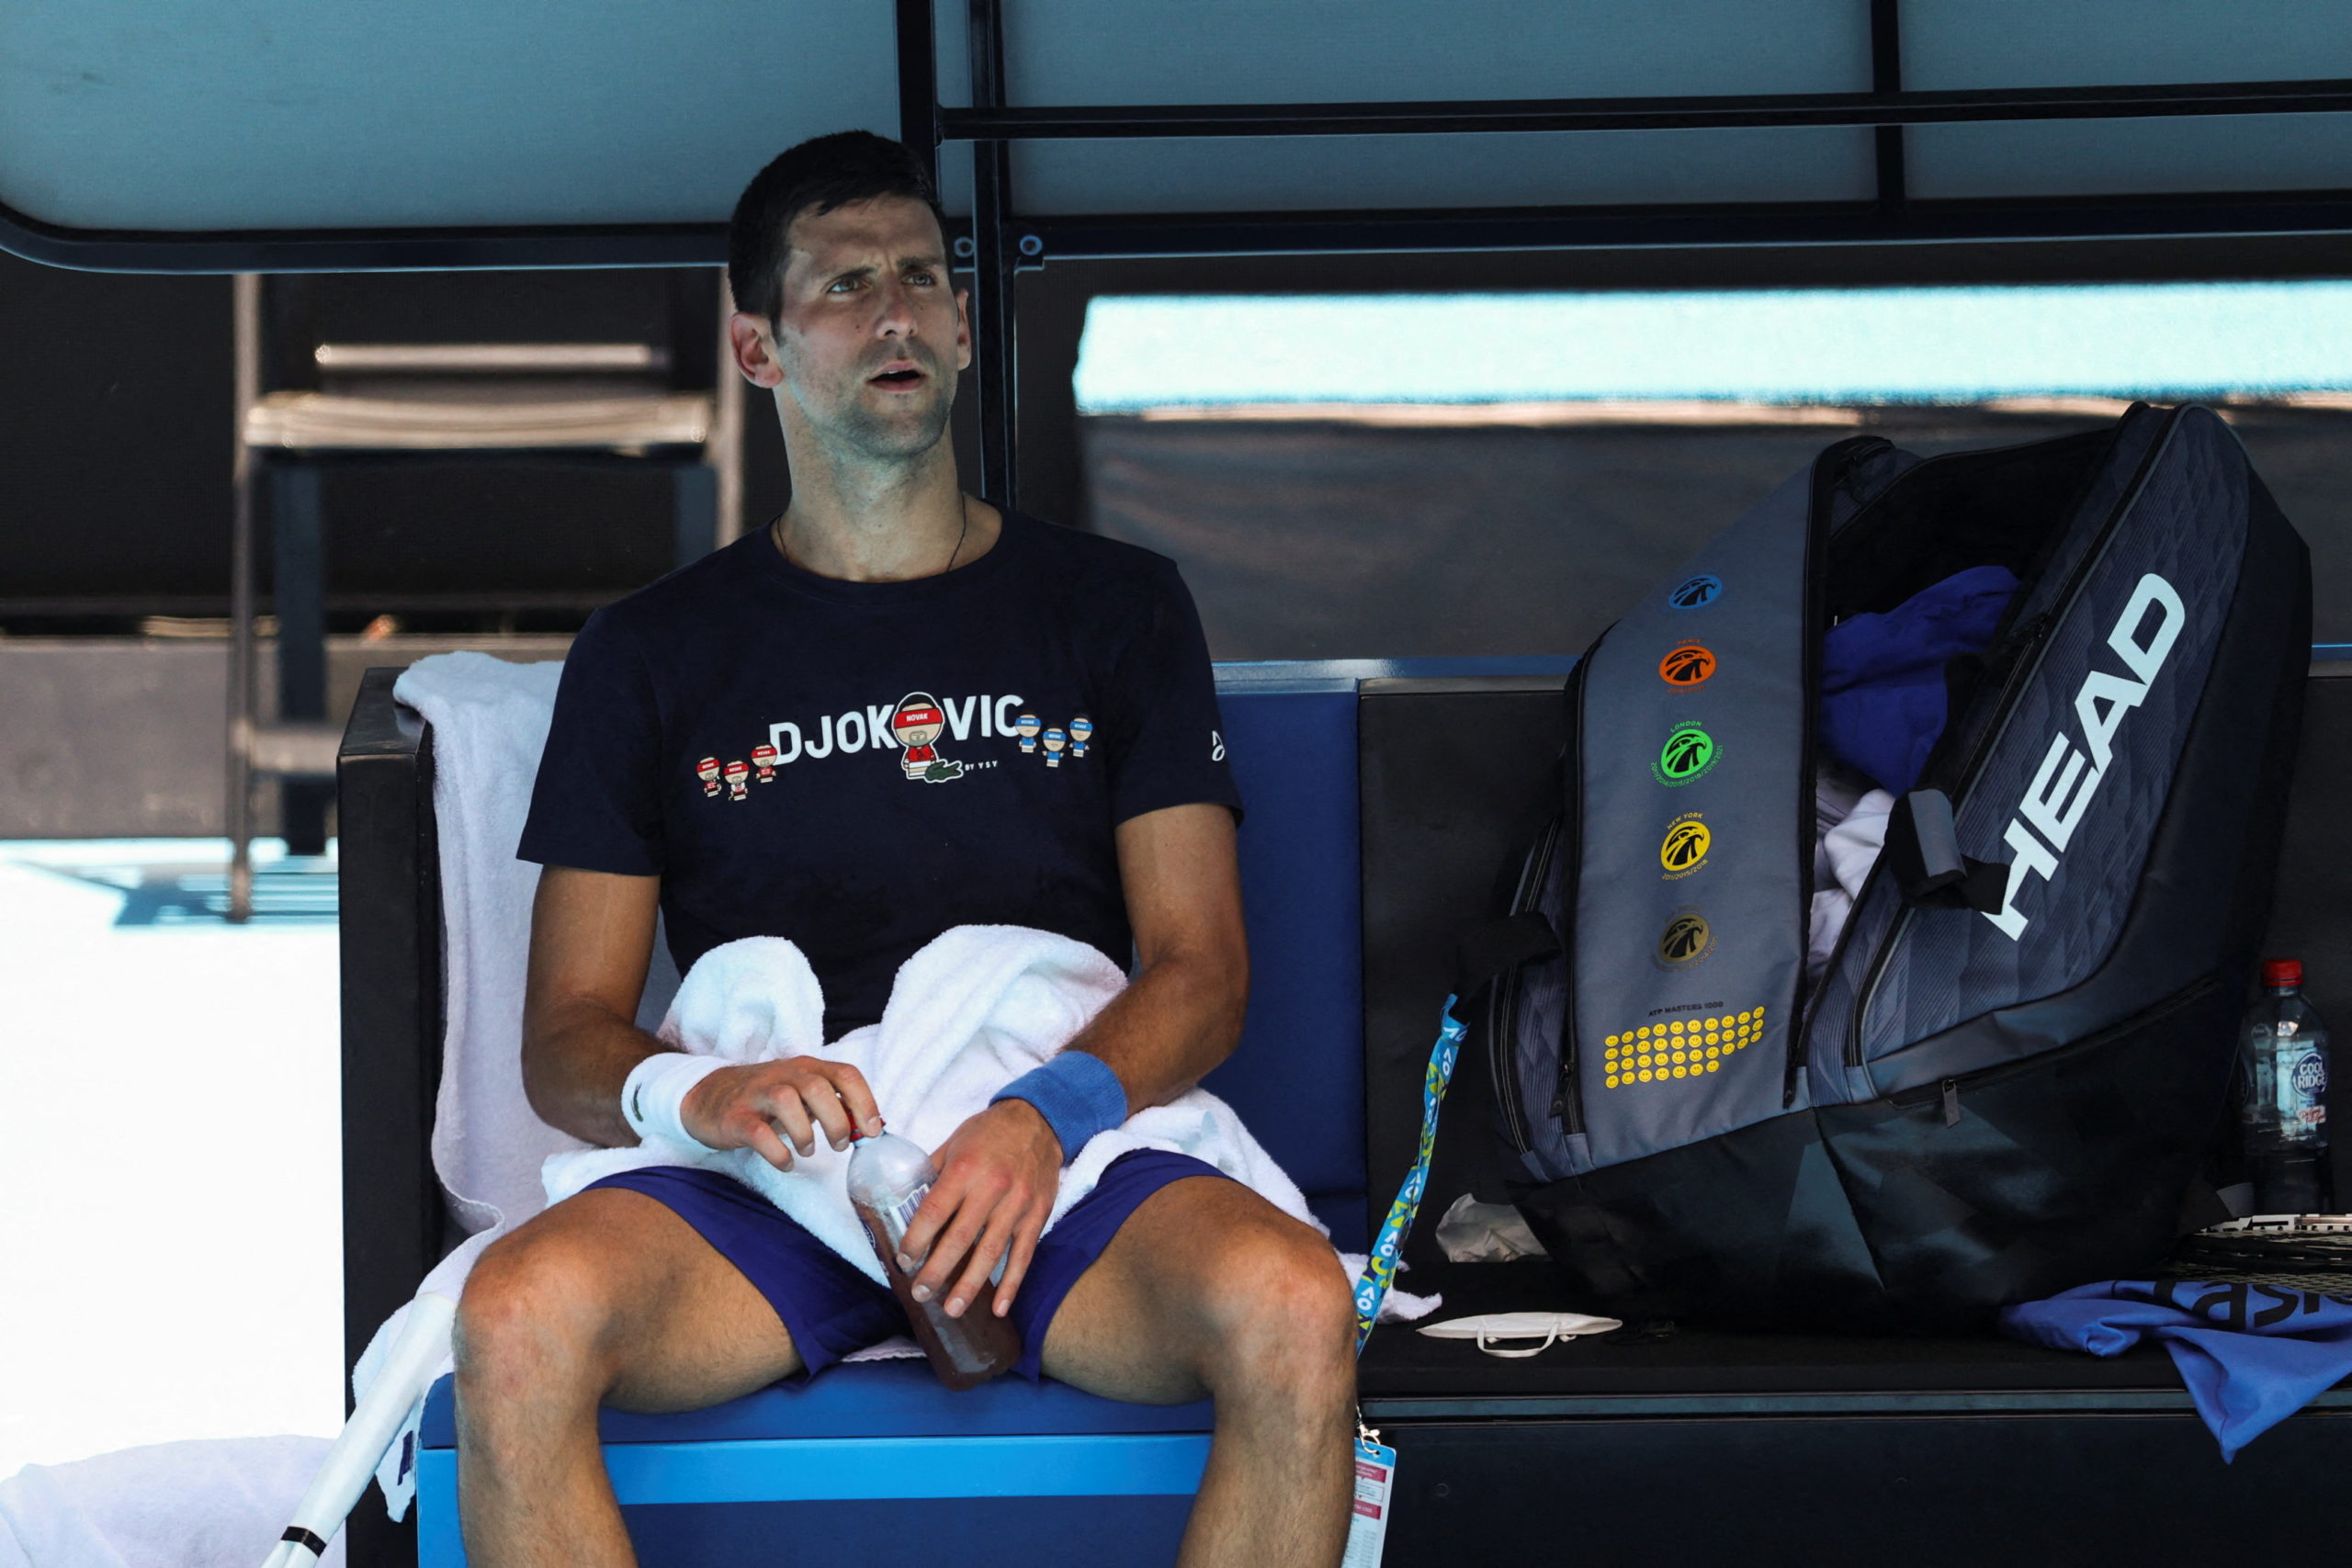 Serbian tennis player Novak Djokovic rests at Melbourne Park as questions remain over the legal battle regarding his visa to play in the Australian Open in Melbourne, Australia, January 12, 2022.